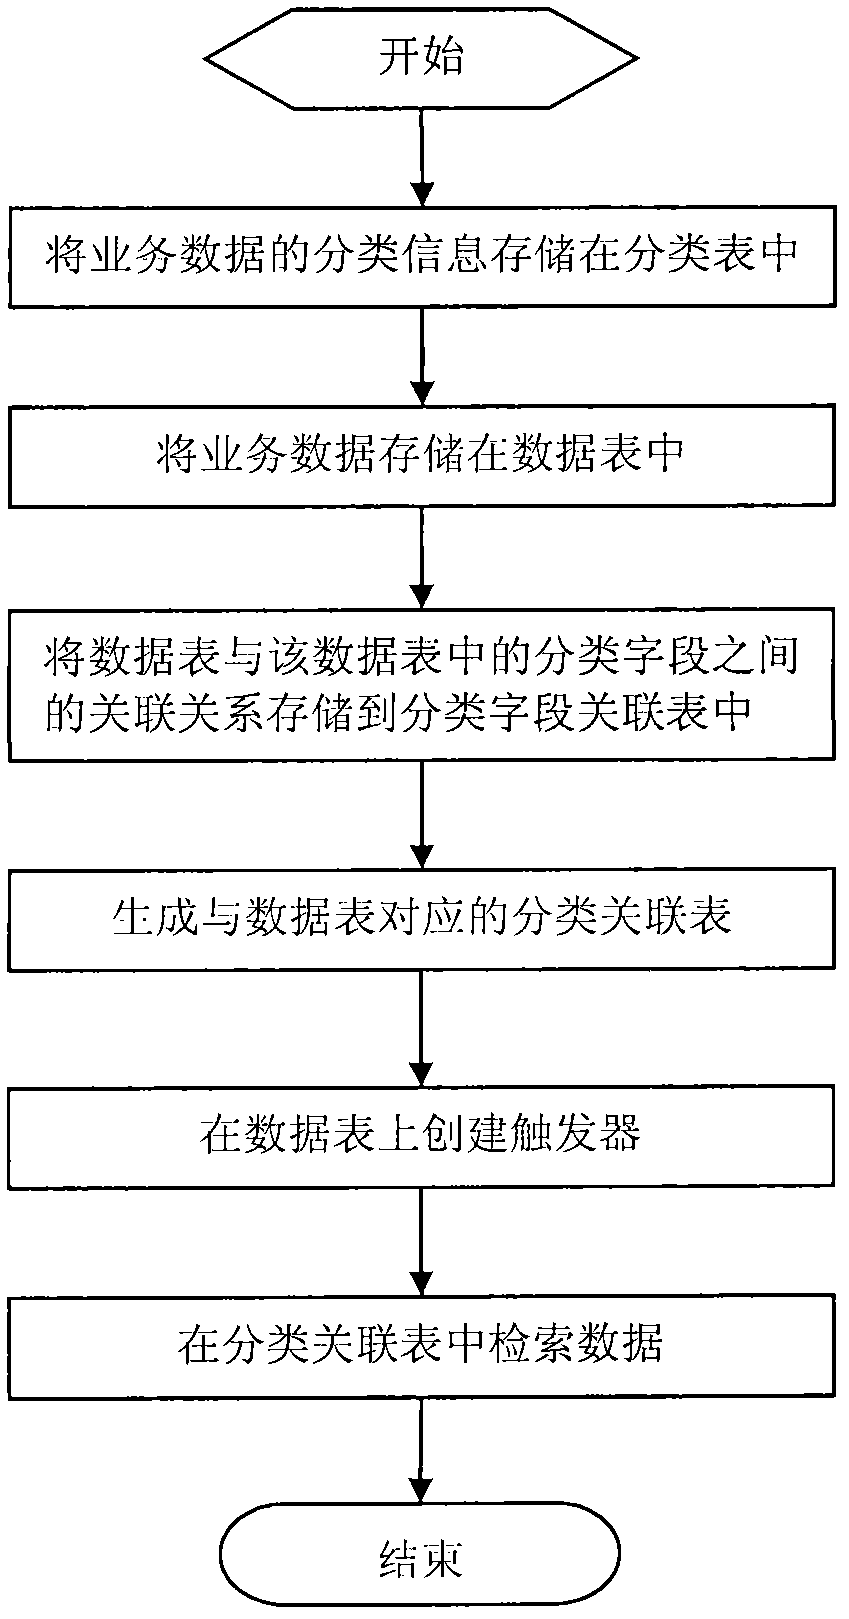 Easily-extensible multi-level classification search method and system